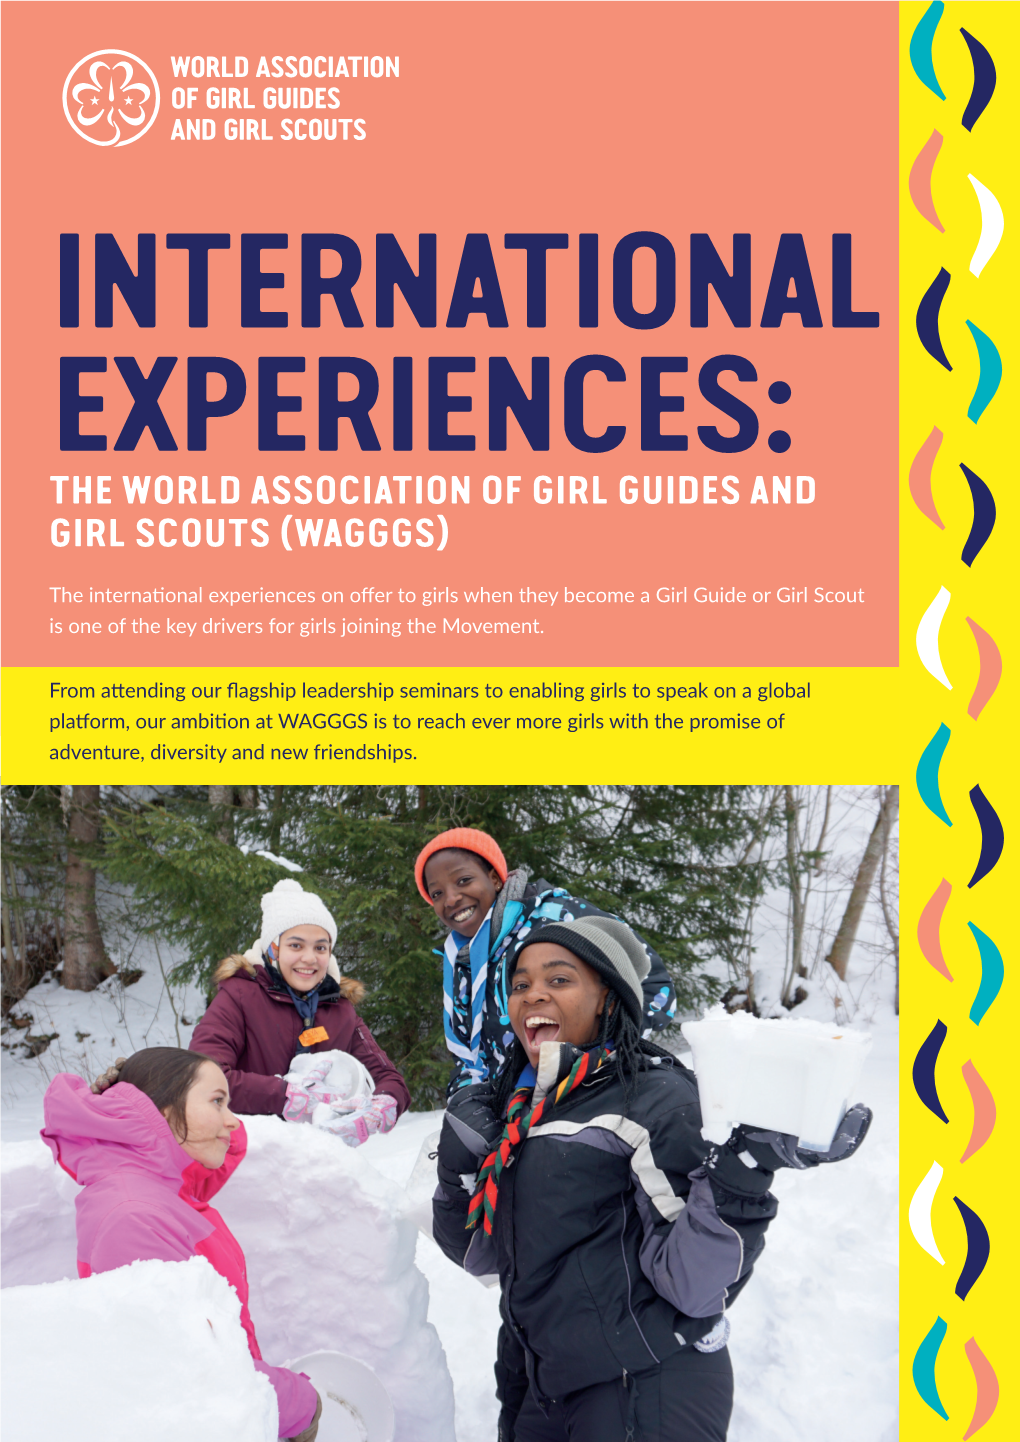 The World Association of Girl Guides and Girl Scouts (Wagggs)